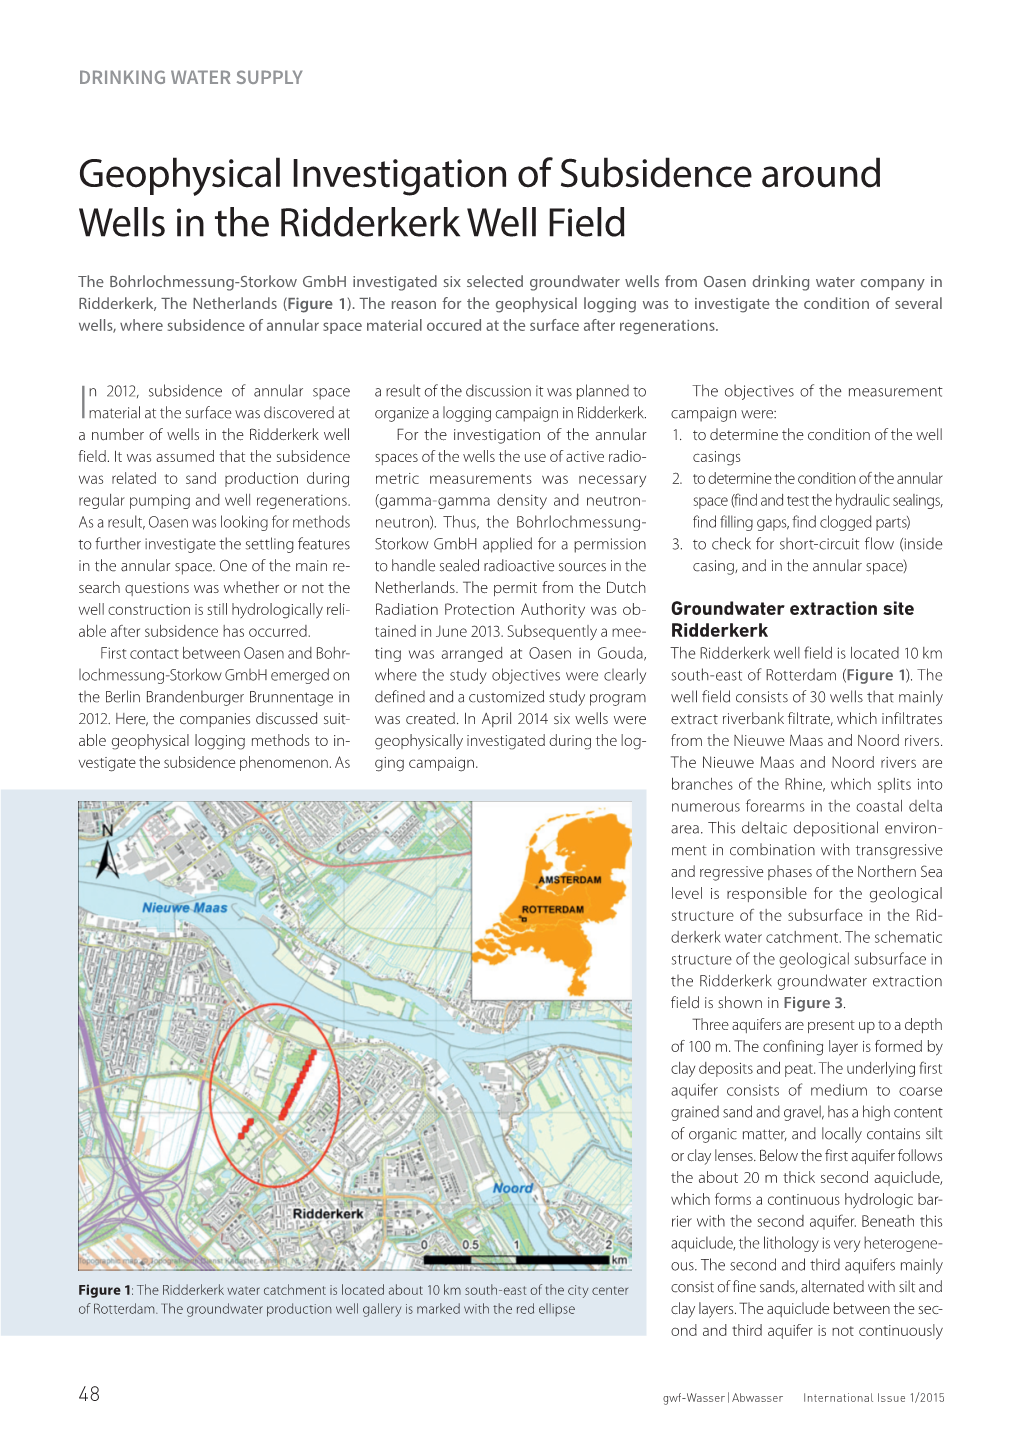 Geophysical Investigation of Subsidence Around Wells in the Ridderkerk Well Field